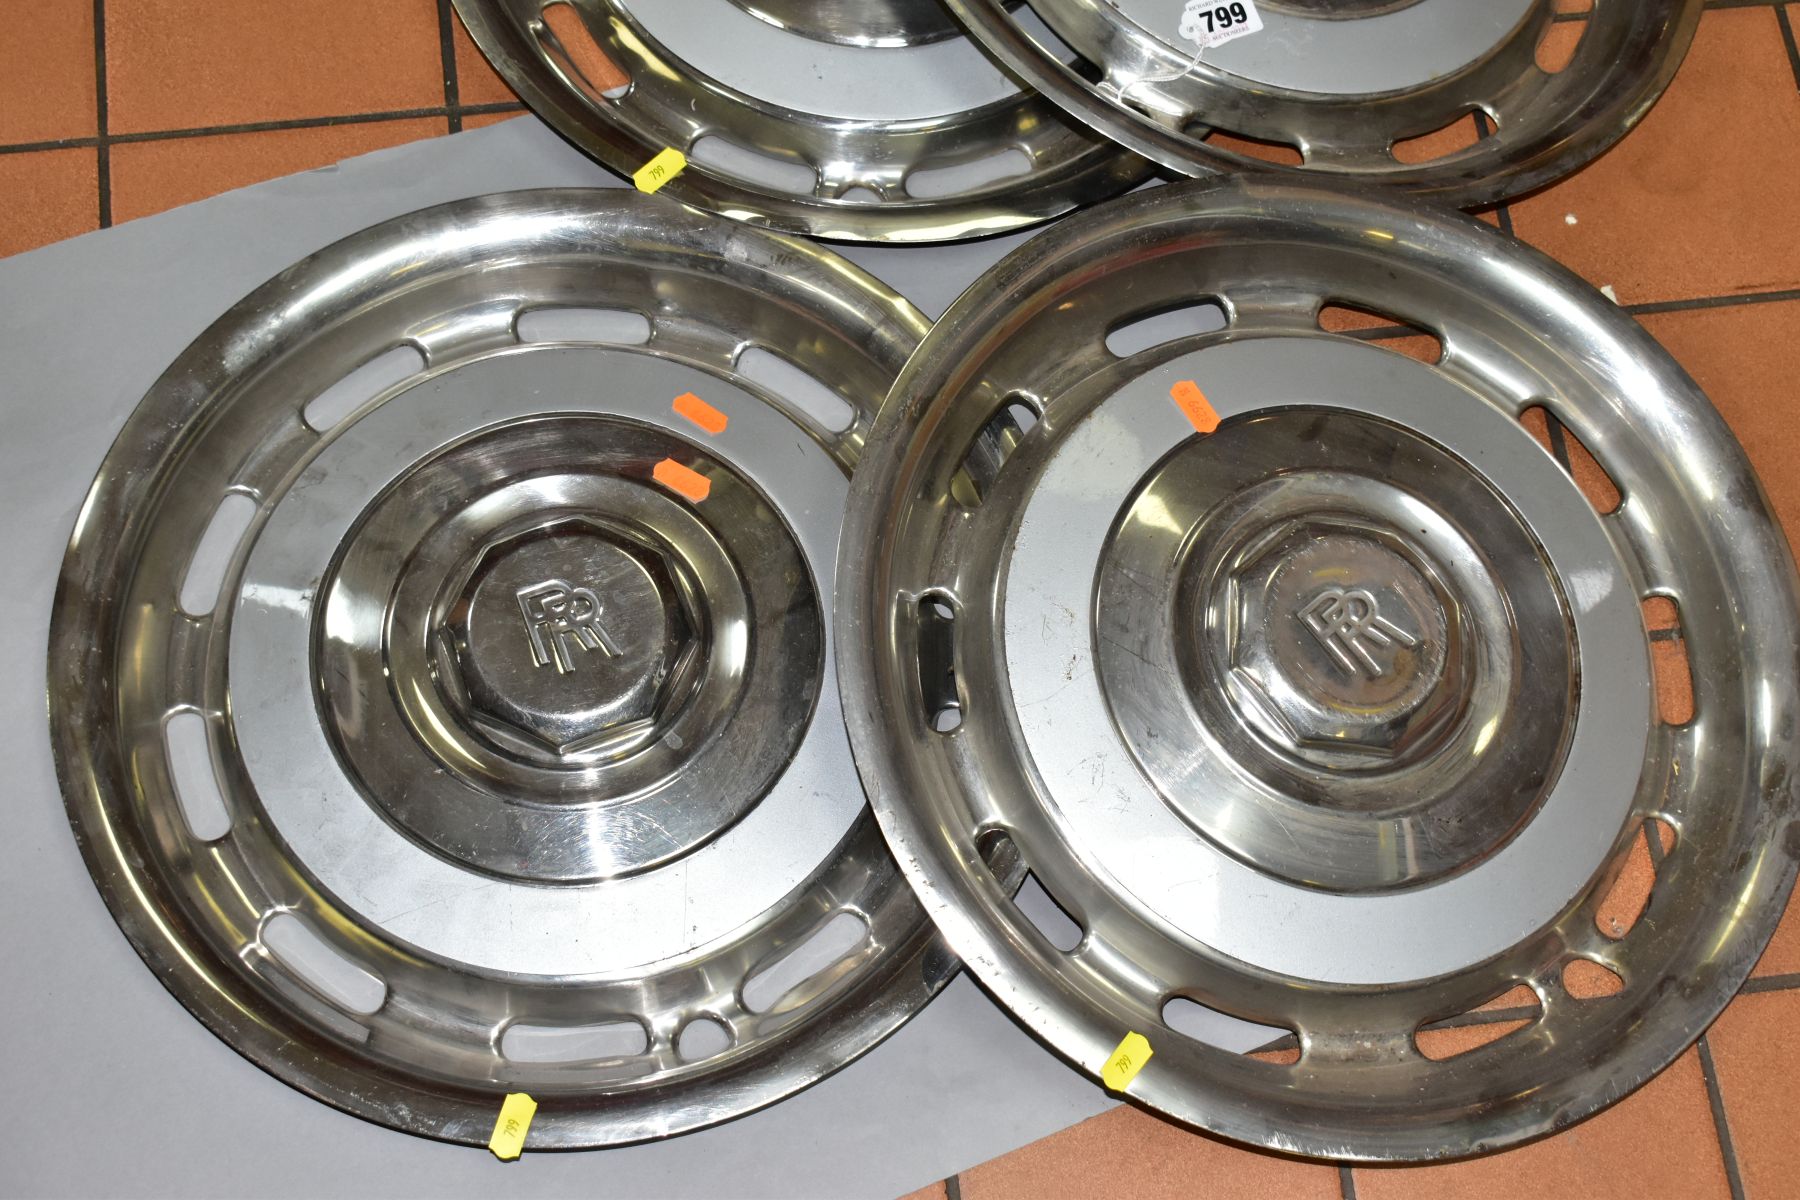 A SET OF FOUR CHROME ROLLS ROYCE HUB CAPS, diameter 42.5cm, with light grey band and central Rolls - Image 3 of 3